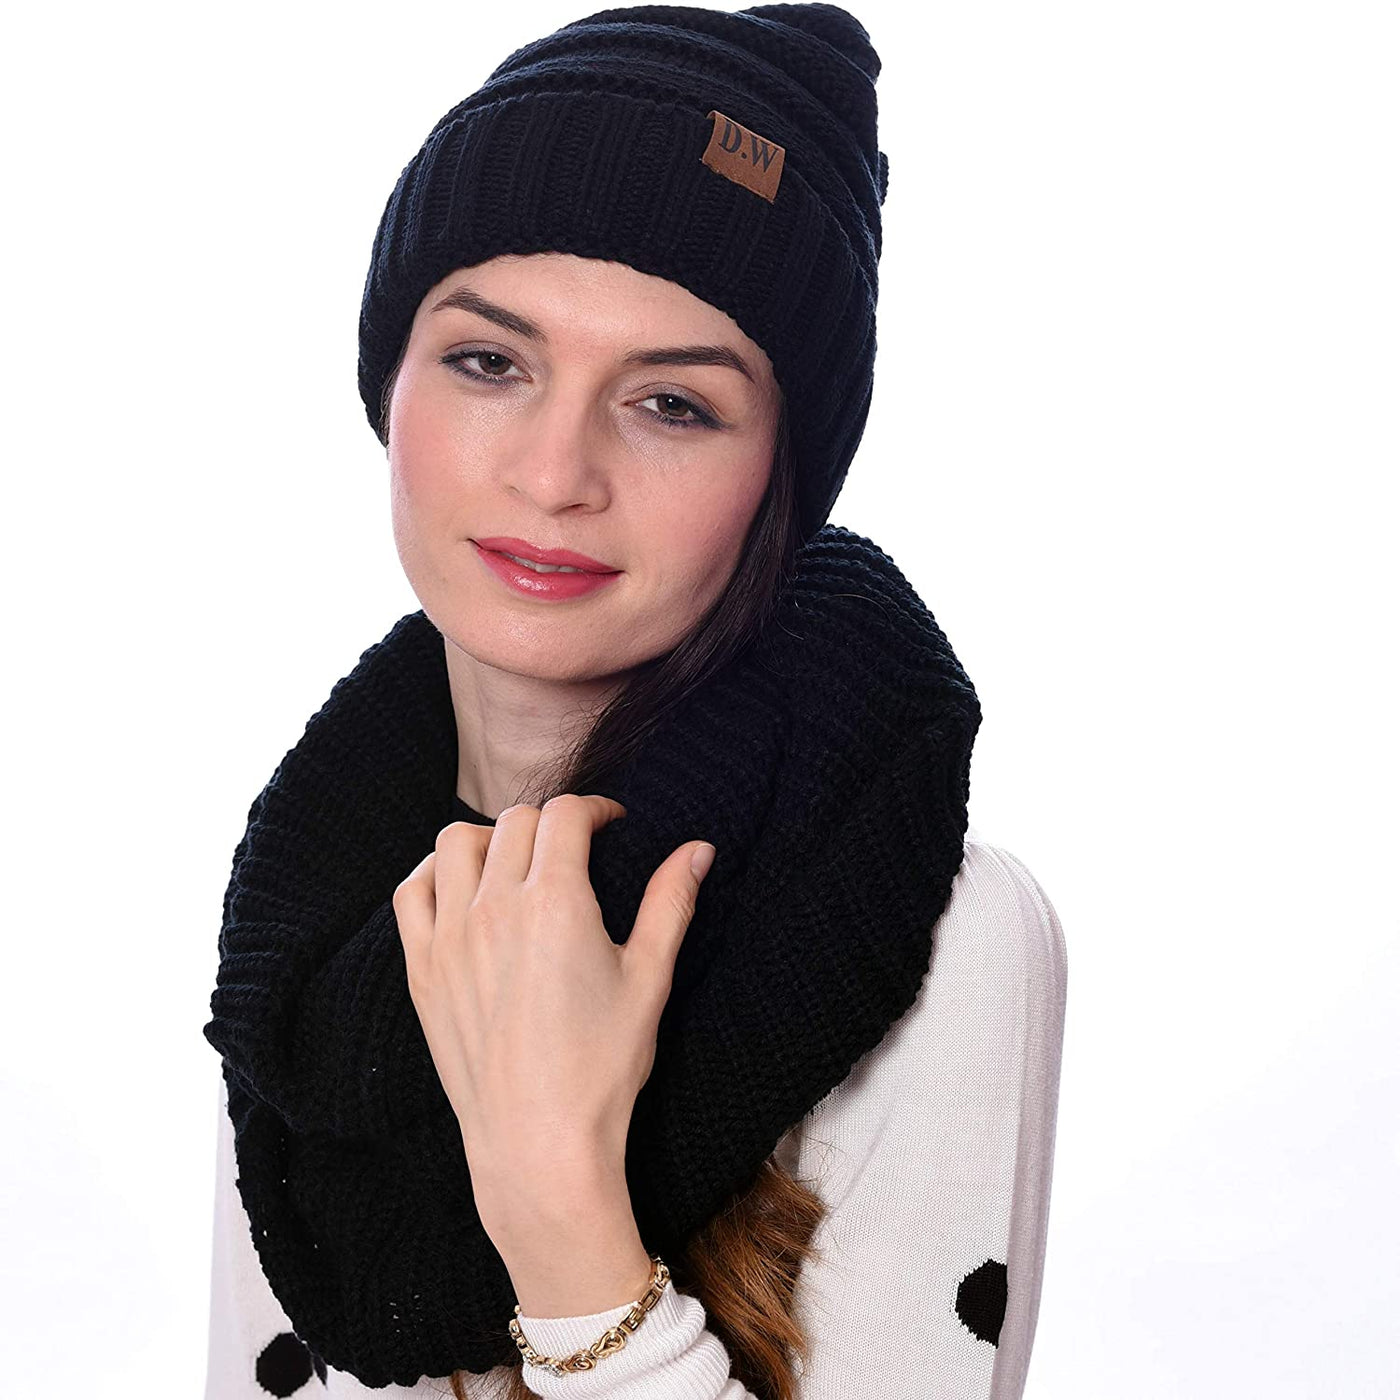 Debra Weitzner Womens Winter Slouchy Beanie Hat and Infinity Scarf Set - Knit Ski Skull Cap and Loop Scarf for Women